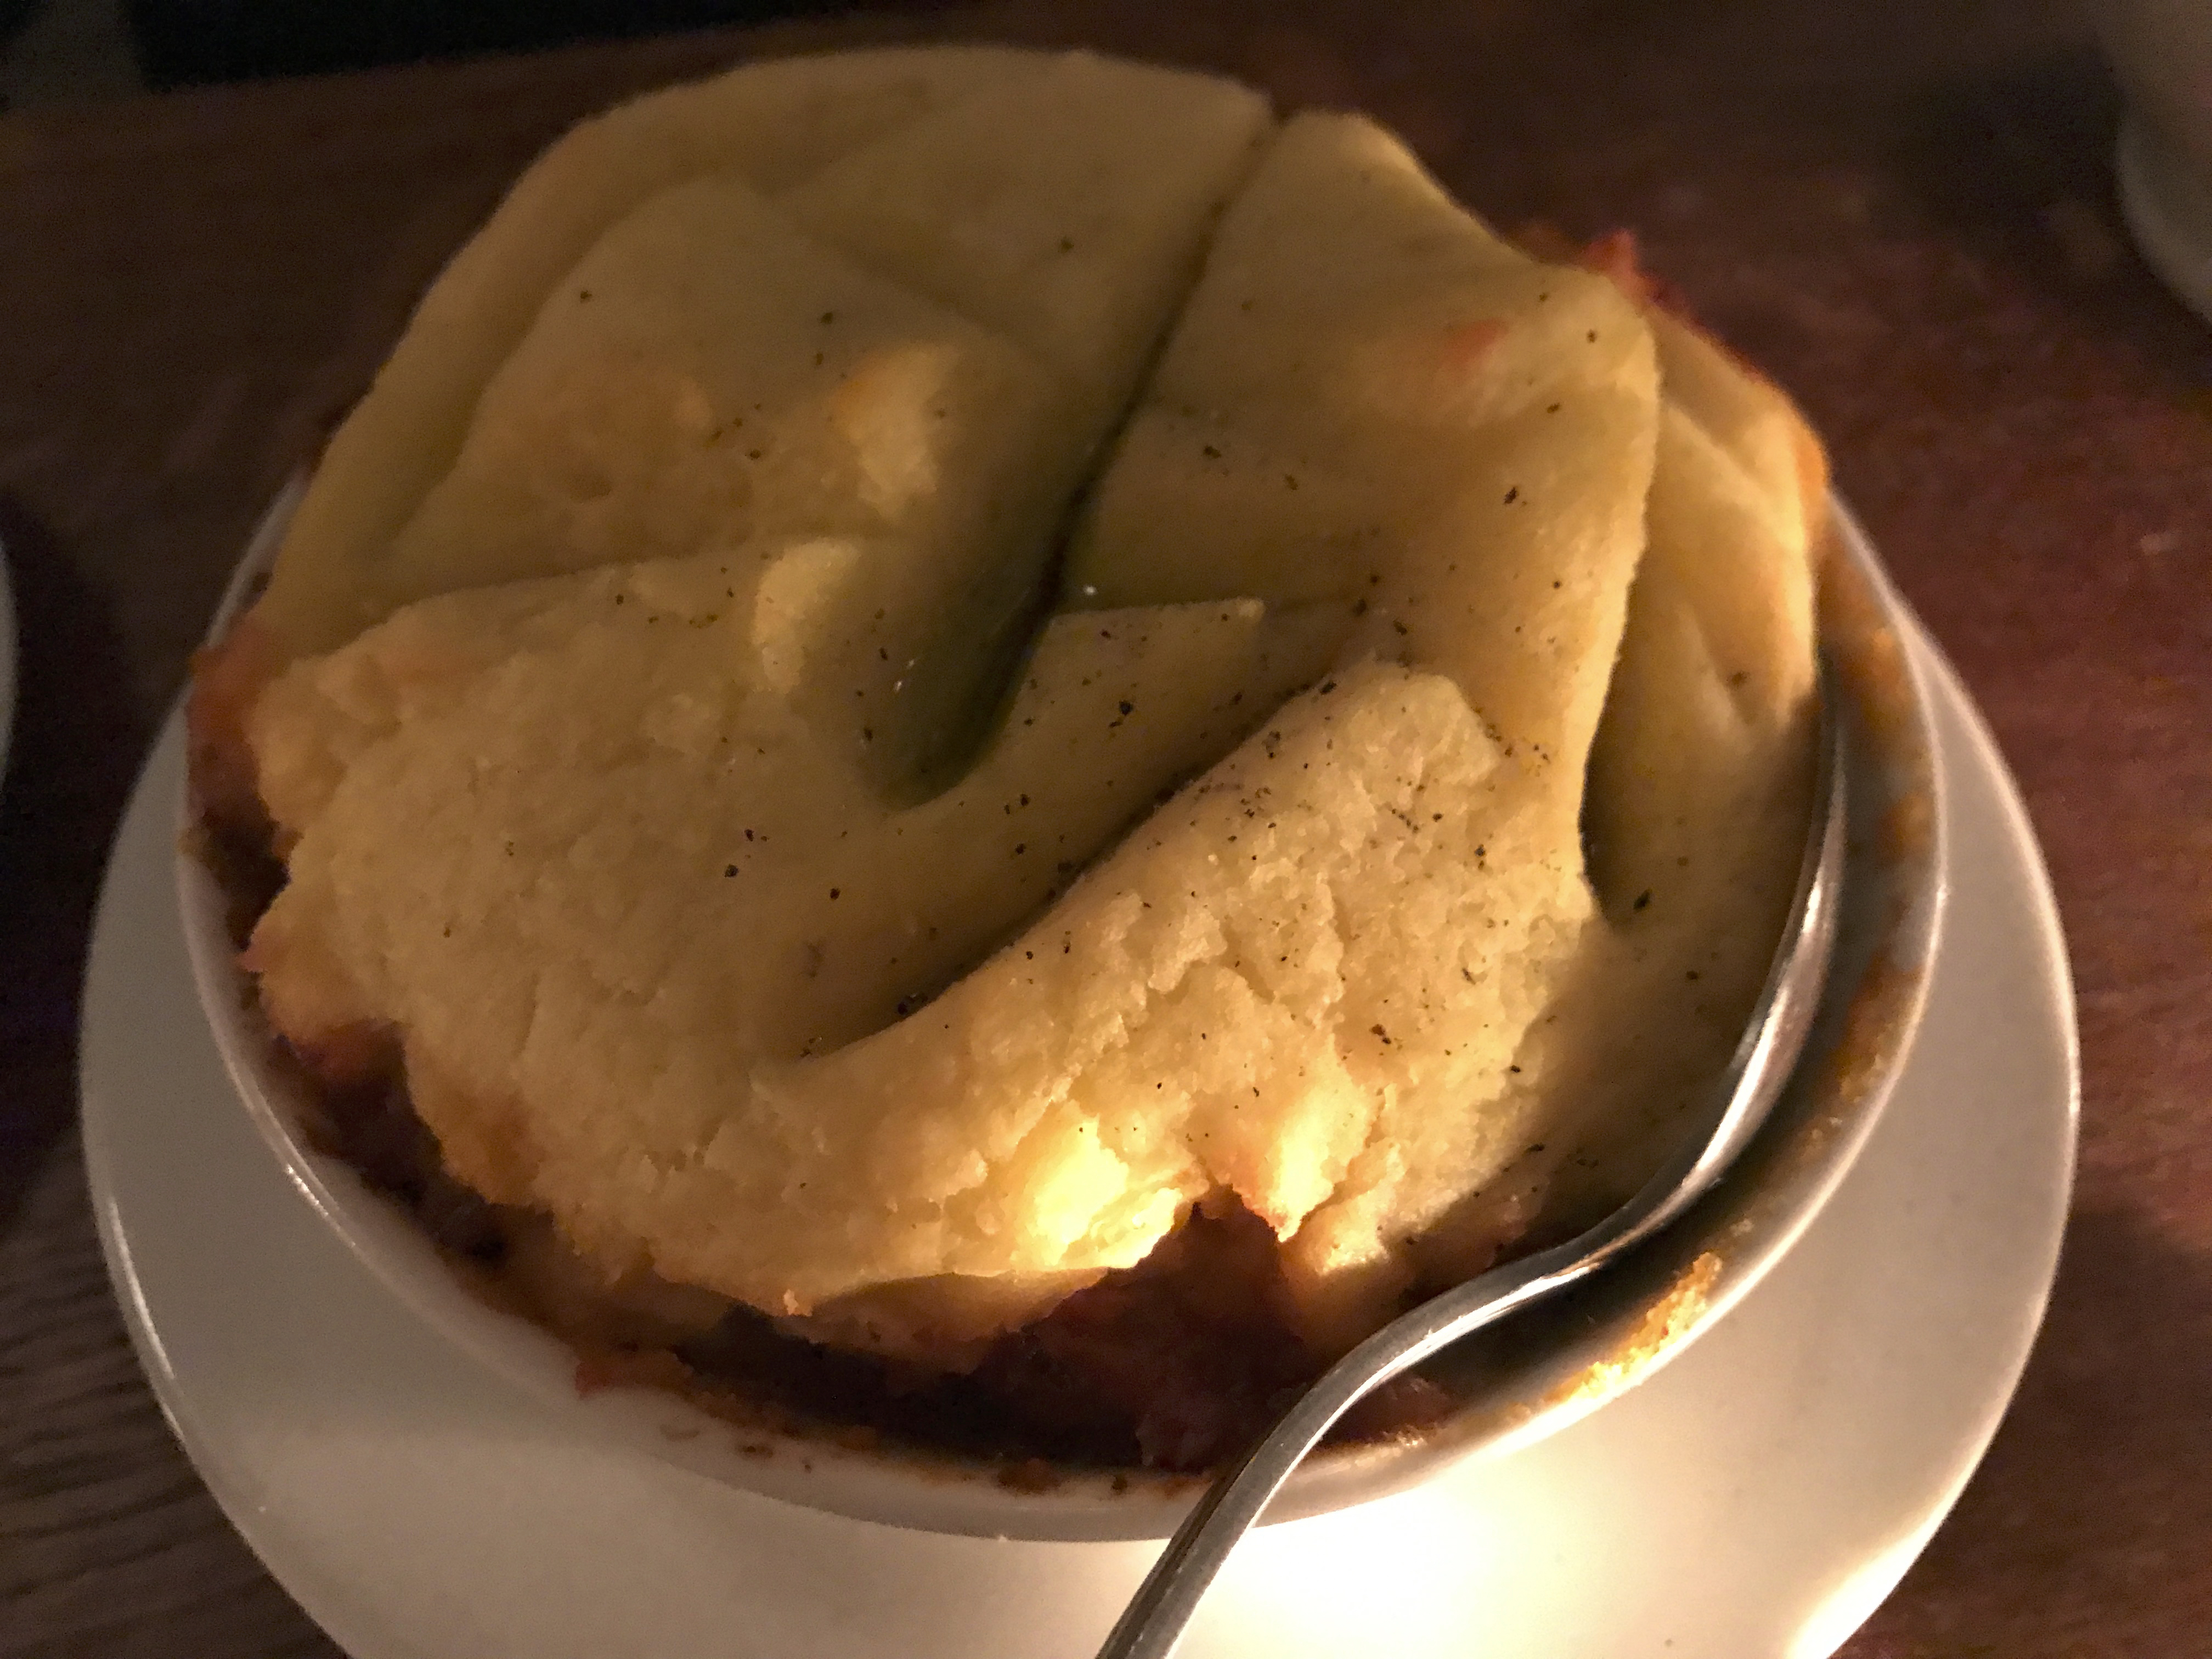 A photo of hachis parmentier boeuf mijoté et purée (a traditional French casserole made with beef stew and whipped potatoes) at Buvette, a Local restaurant in Paris, France. Photo Courtesy of FoodWaterShoes